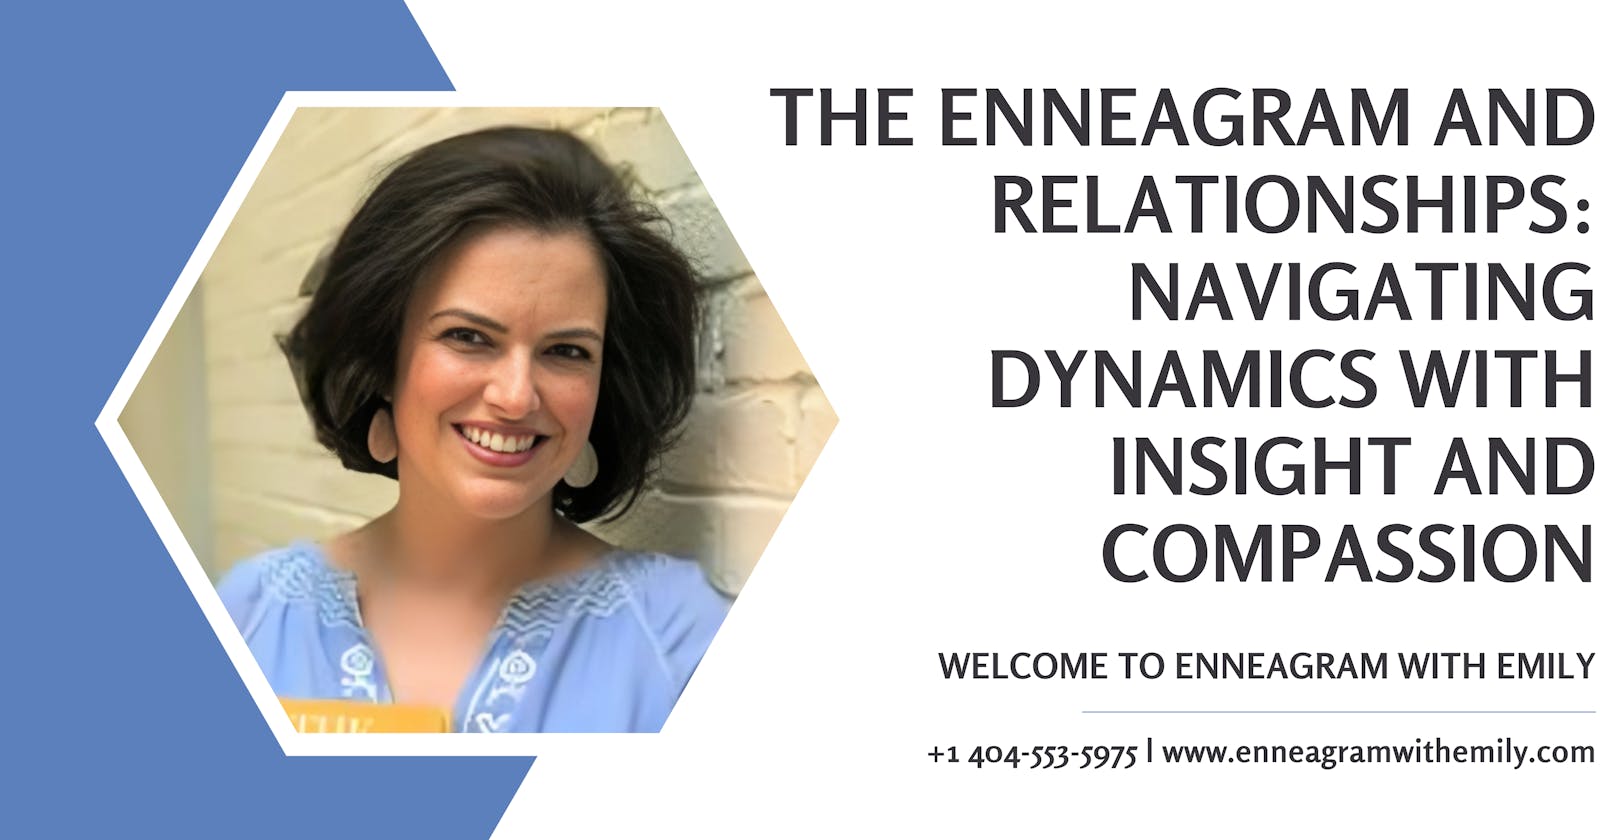 The Enneagram and Relationships: Navigating Dynamics with Insight and Compassion